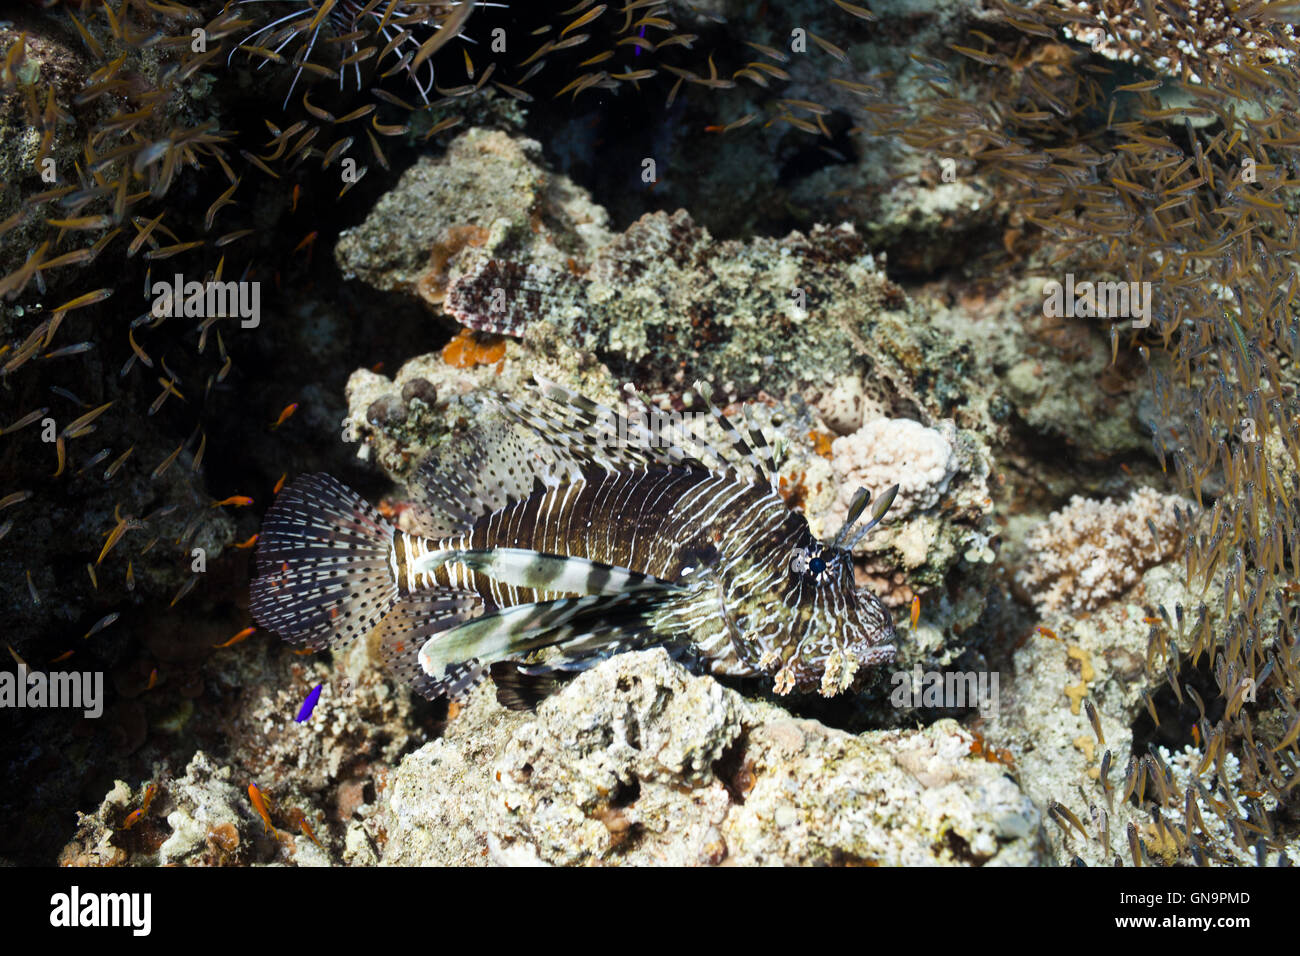 Lion fish and another fishes in the sea Stock Photo